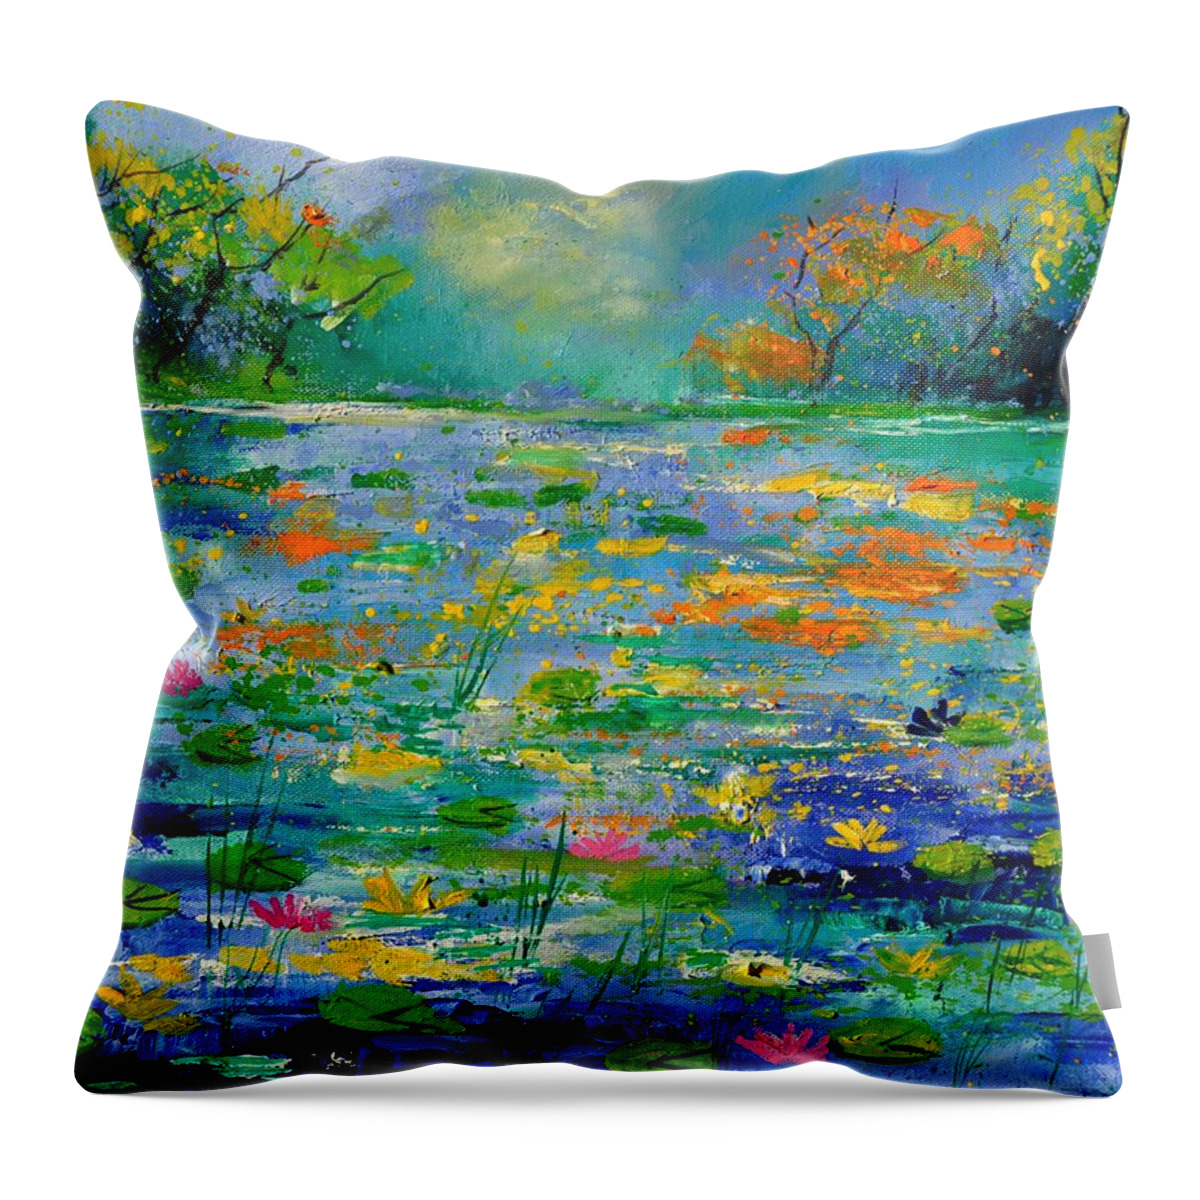 Landscape Throw Pillow featuring the painting Pond 454190 by Pol Ledent